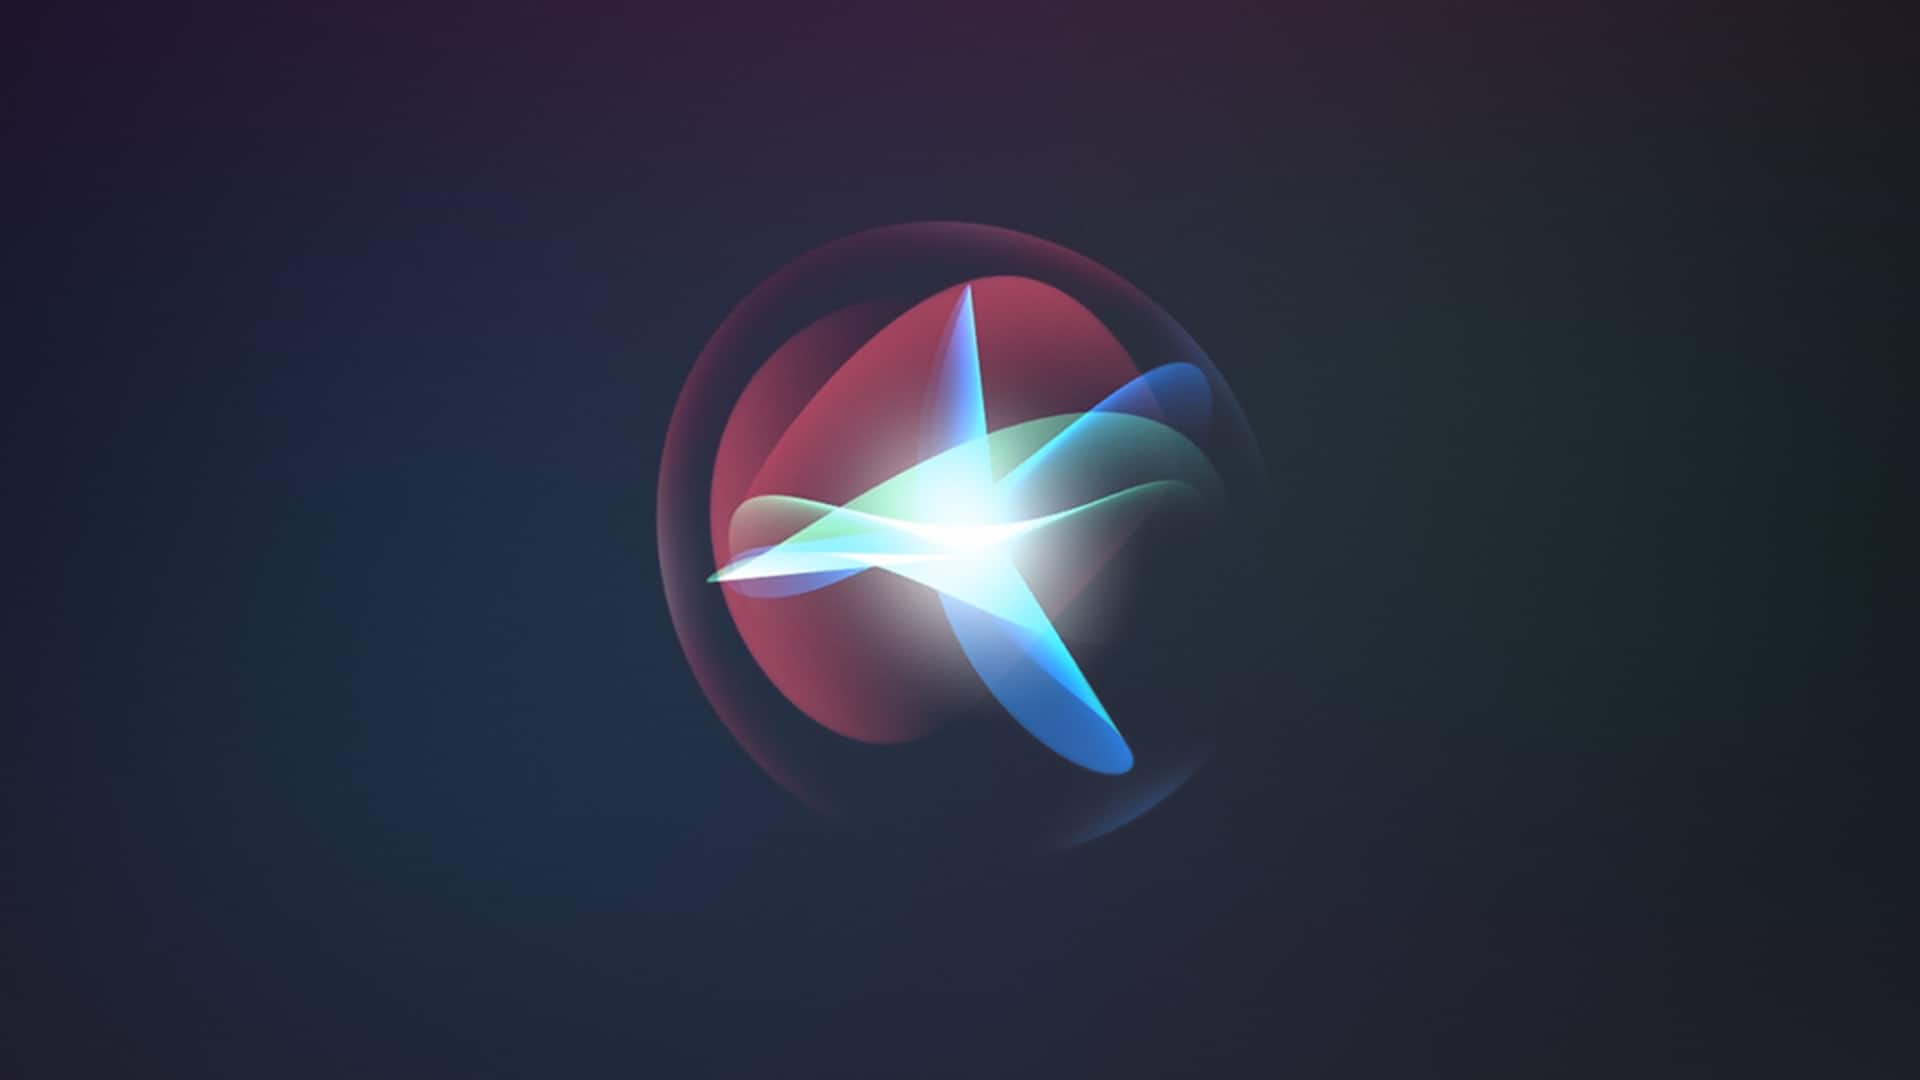 Apple might announce Siri with generative AI capabilities at WWDC